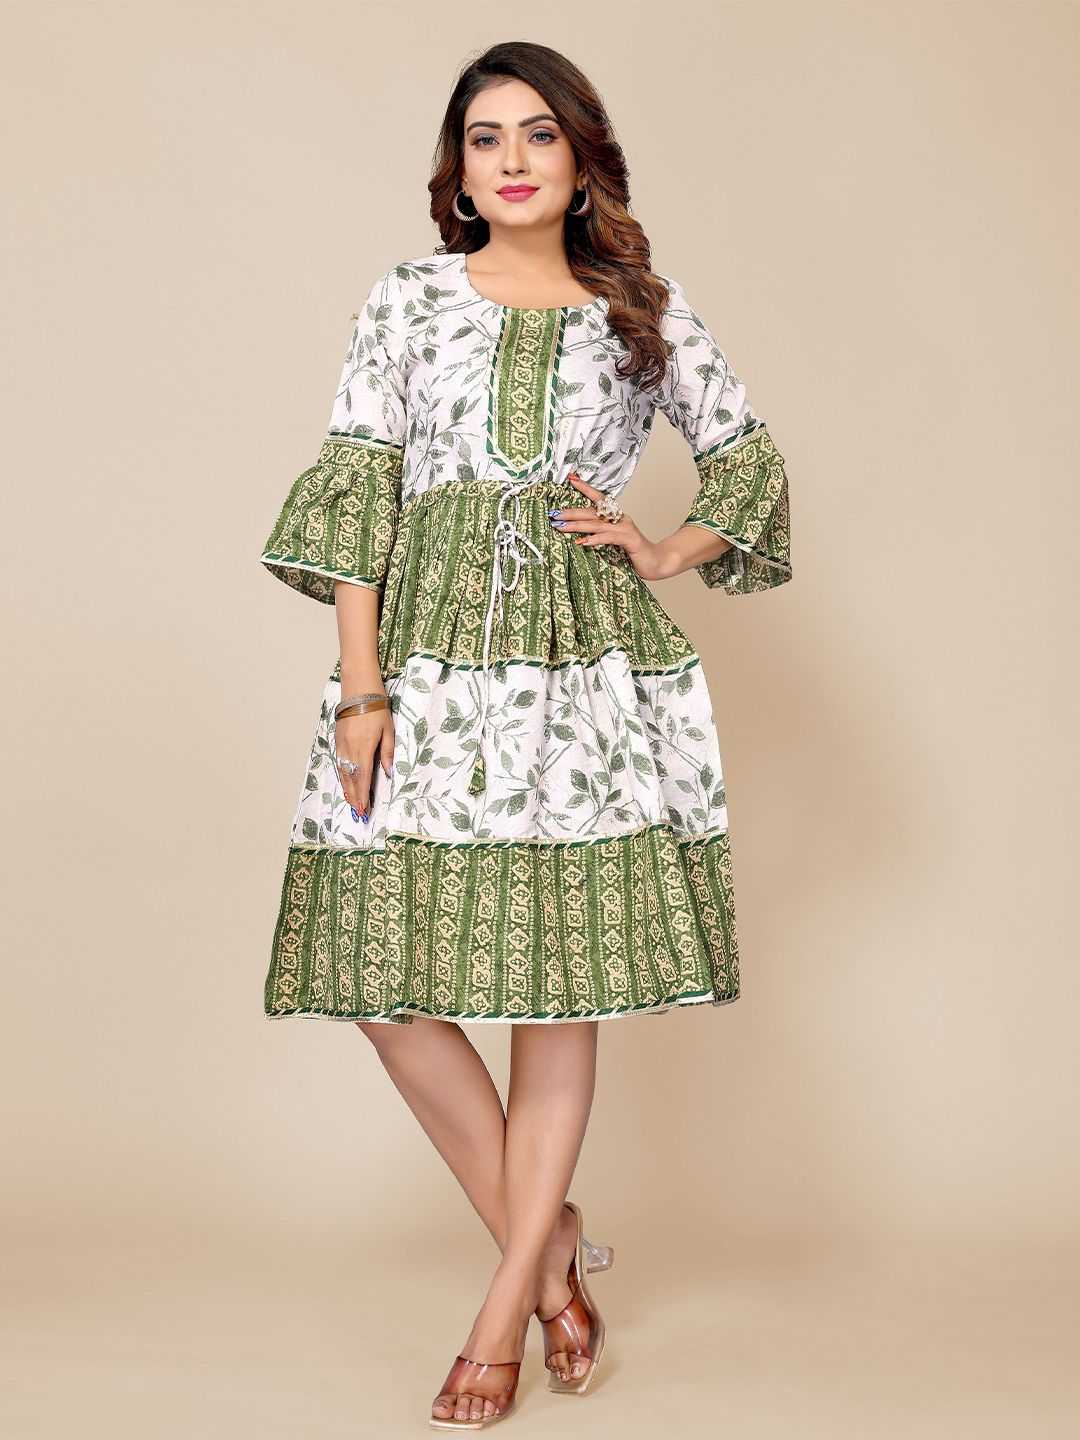 Krimmple Floral Printed Fit & Flare Dress Price in India